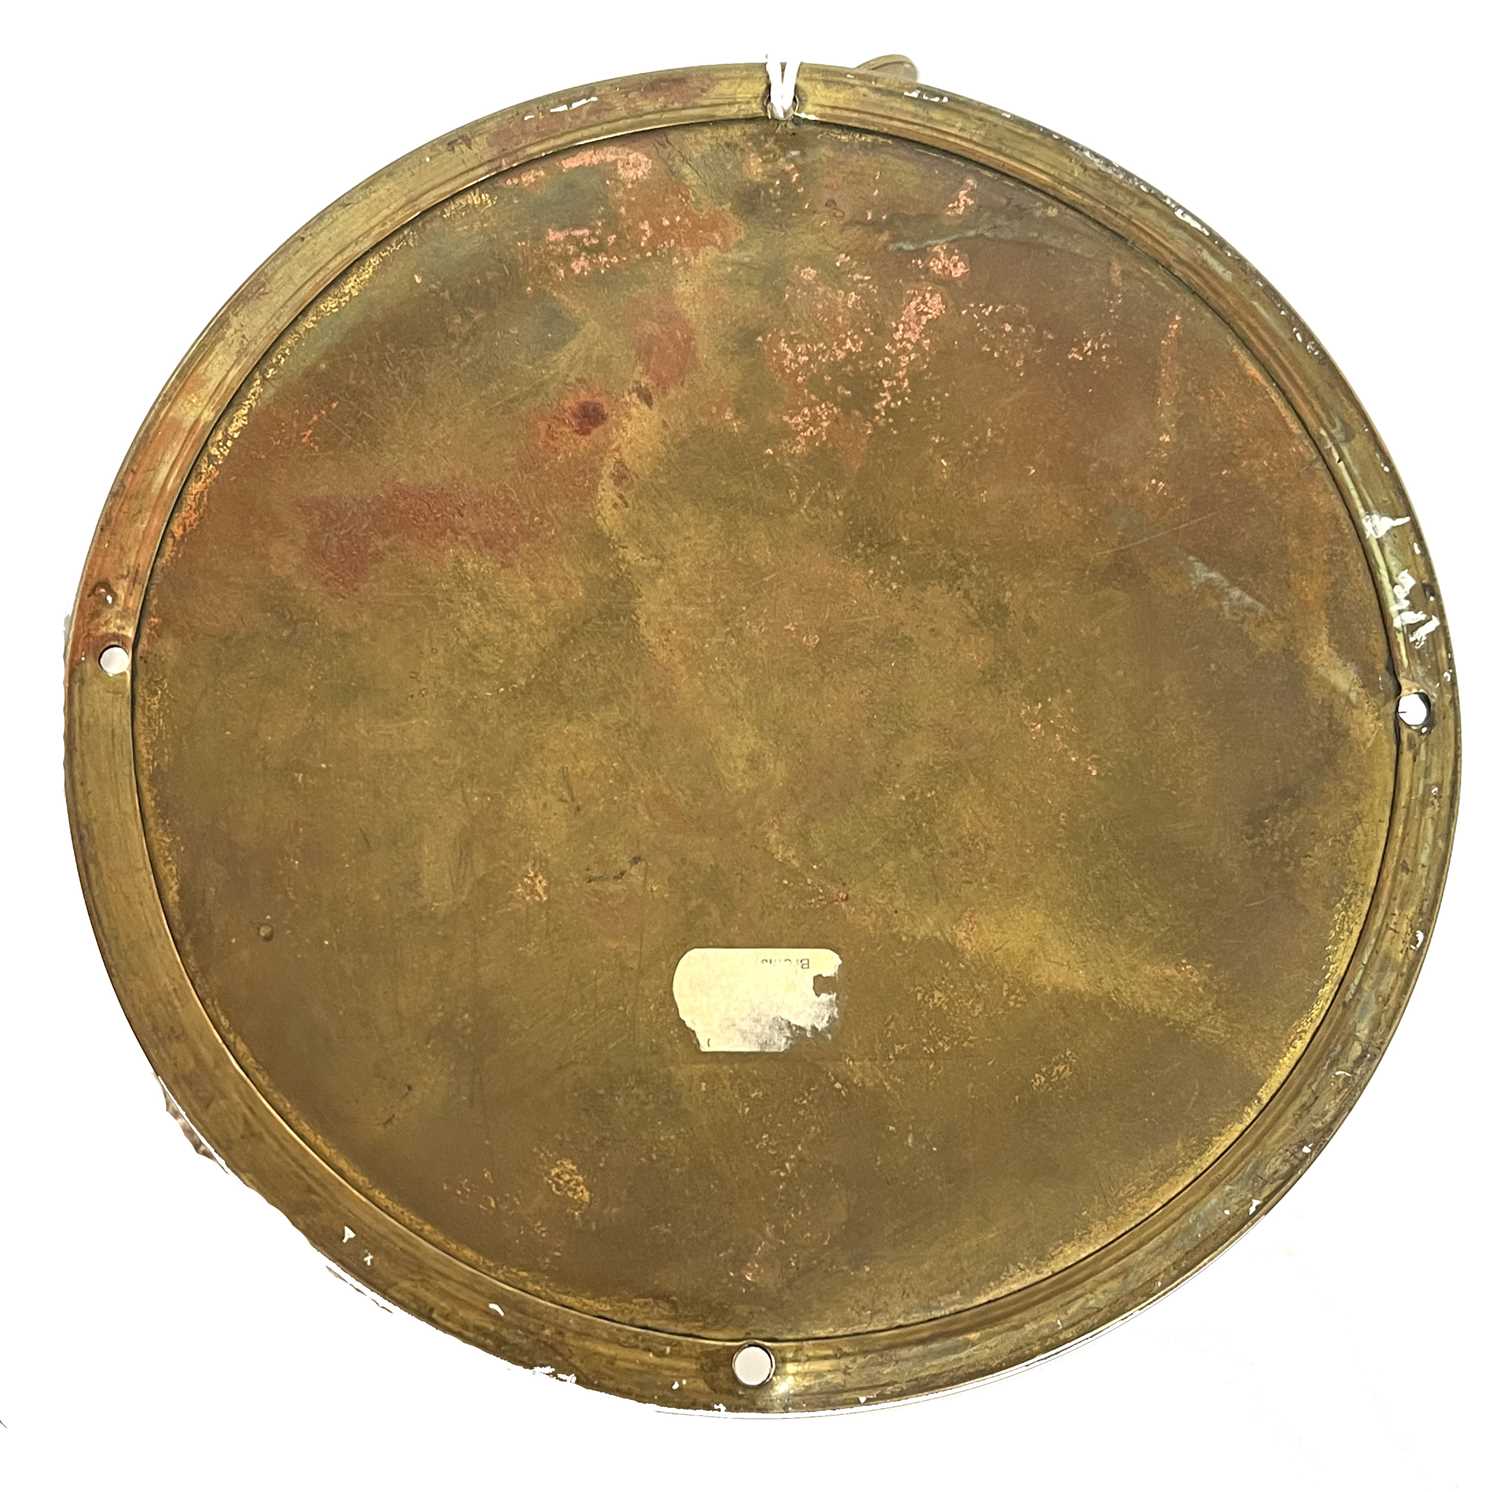 Ships clock in brass case with second dial and key - Image 6 of 6